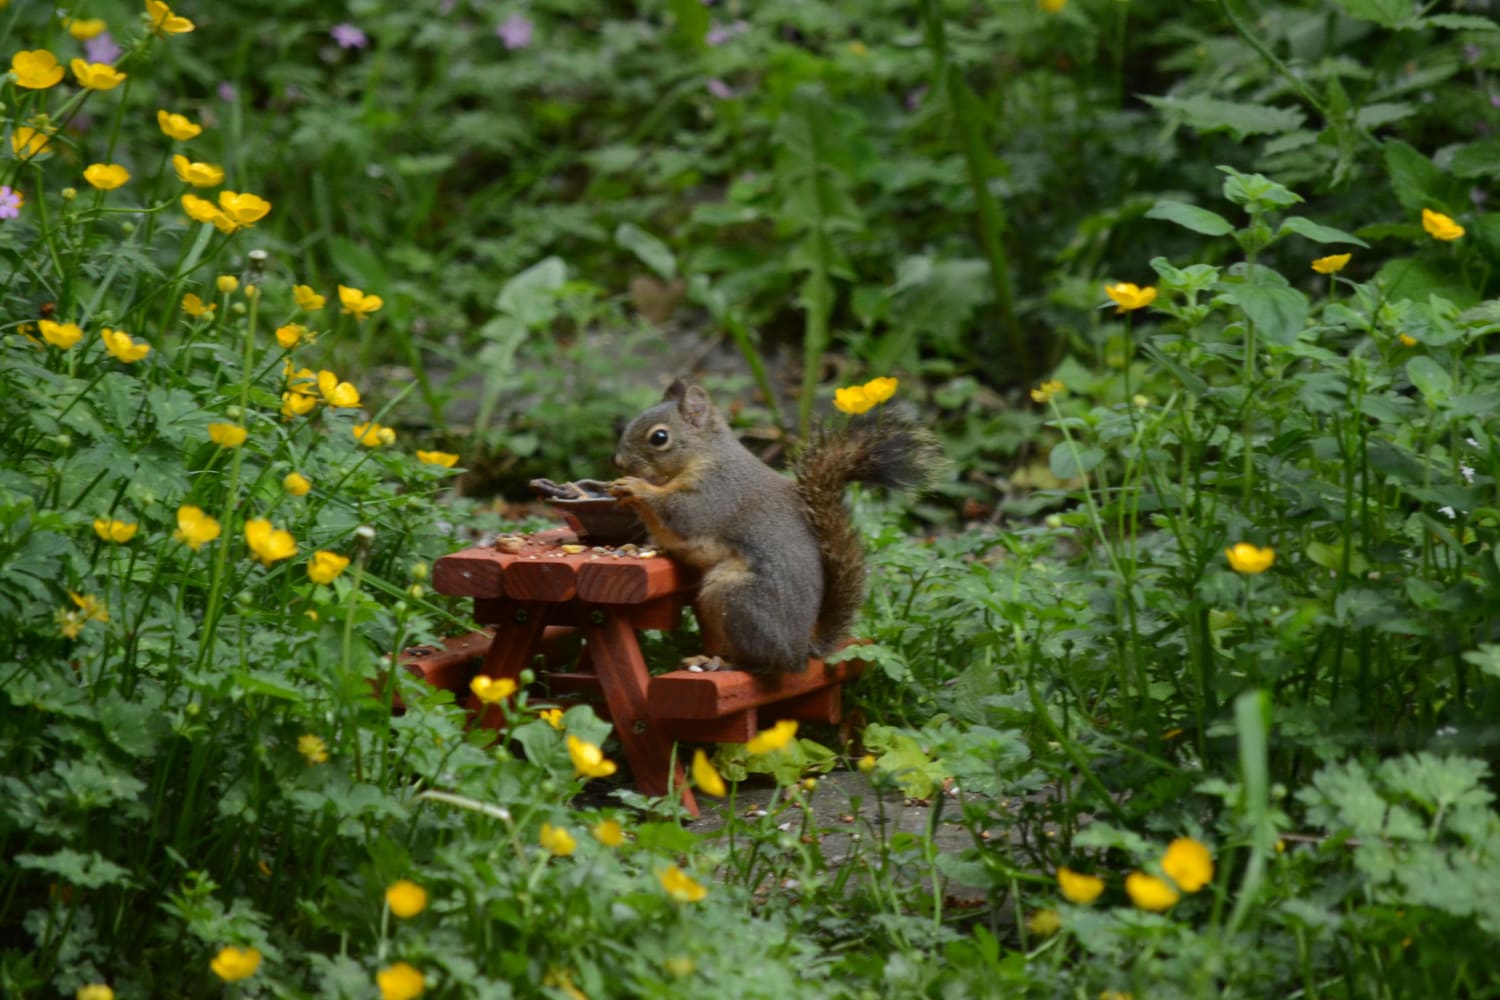 Douglas squirrel approves of the picnic bench we built it